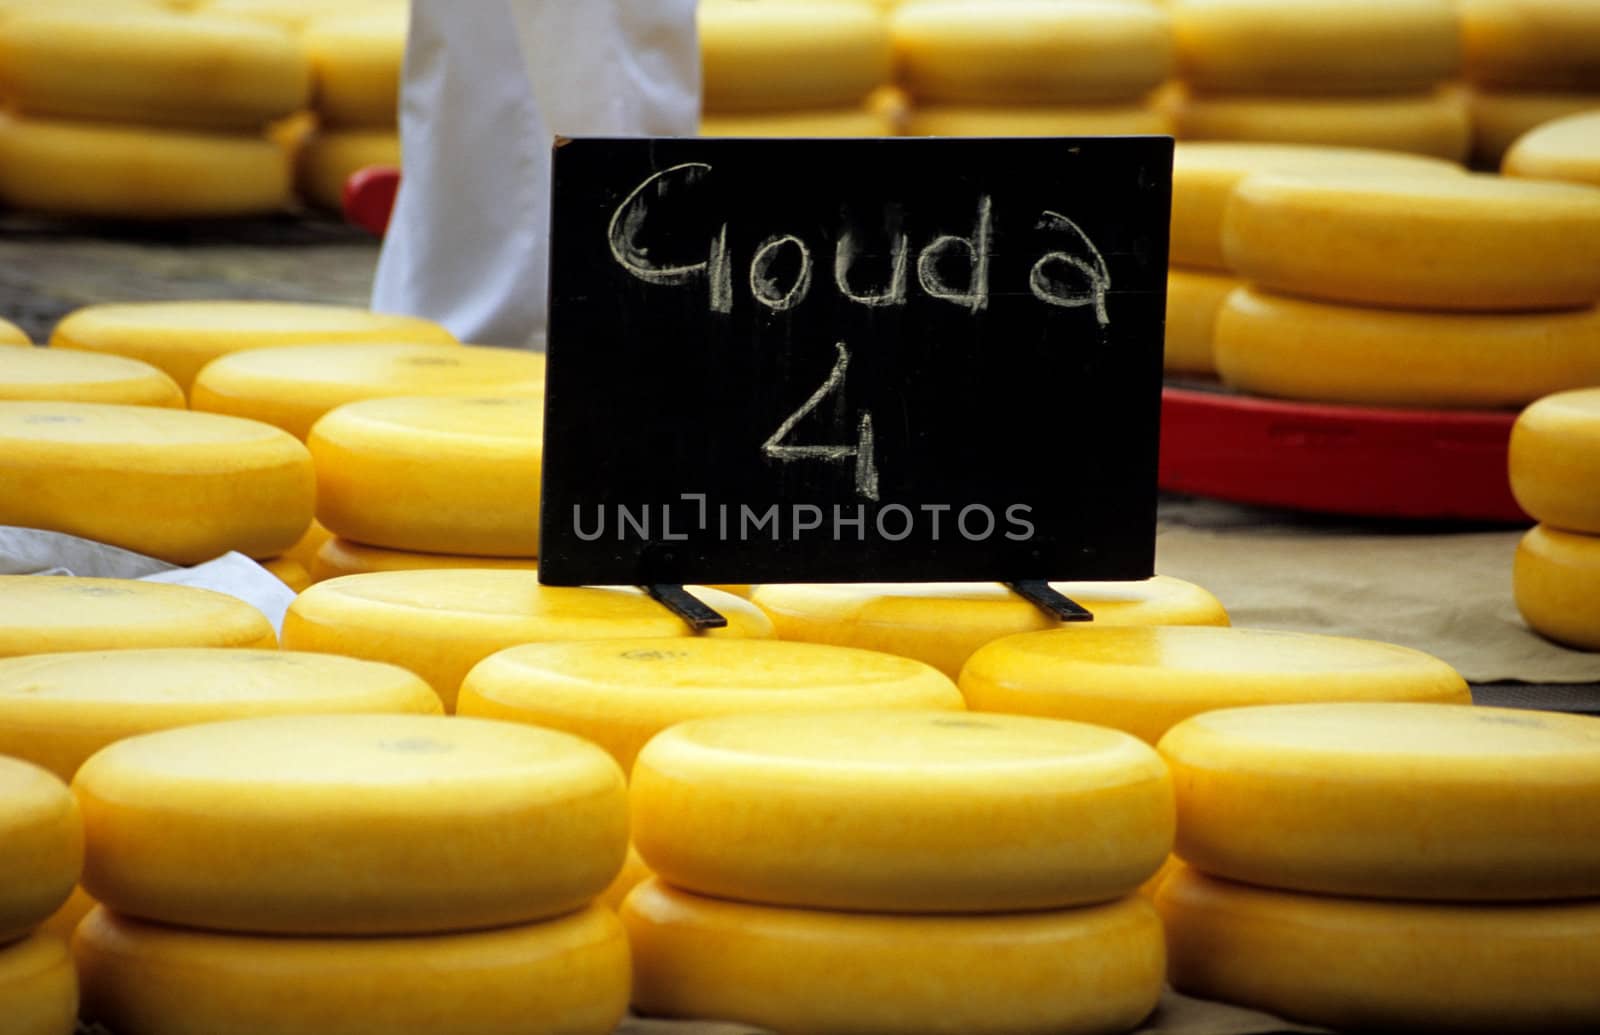 Stacks of Gouda cheese wheels wrapped in wax at the Alkmaar cheese market.